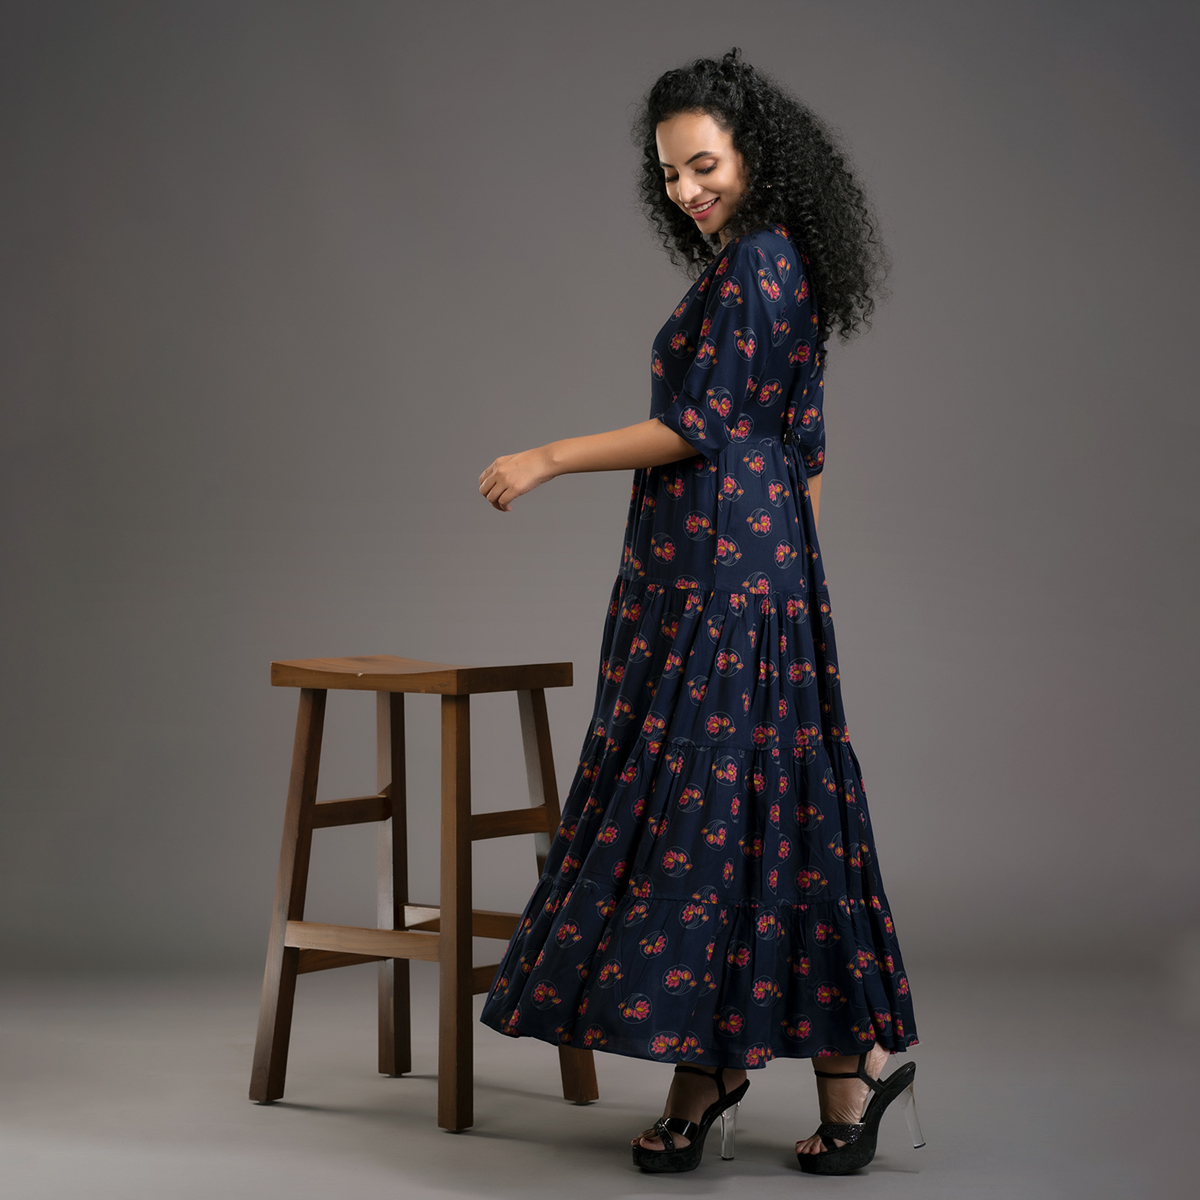 Zella Printed Rayon Ankle Length Tyred Frock styled with Key Hole Neck - Navy Blue